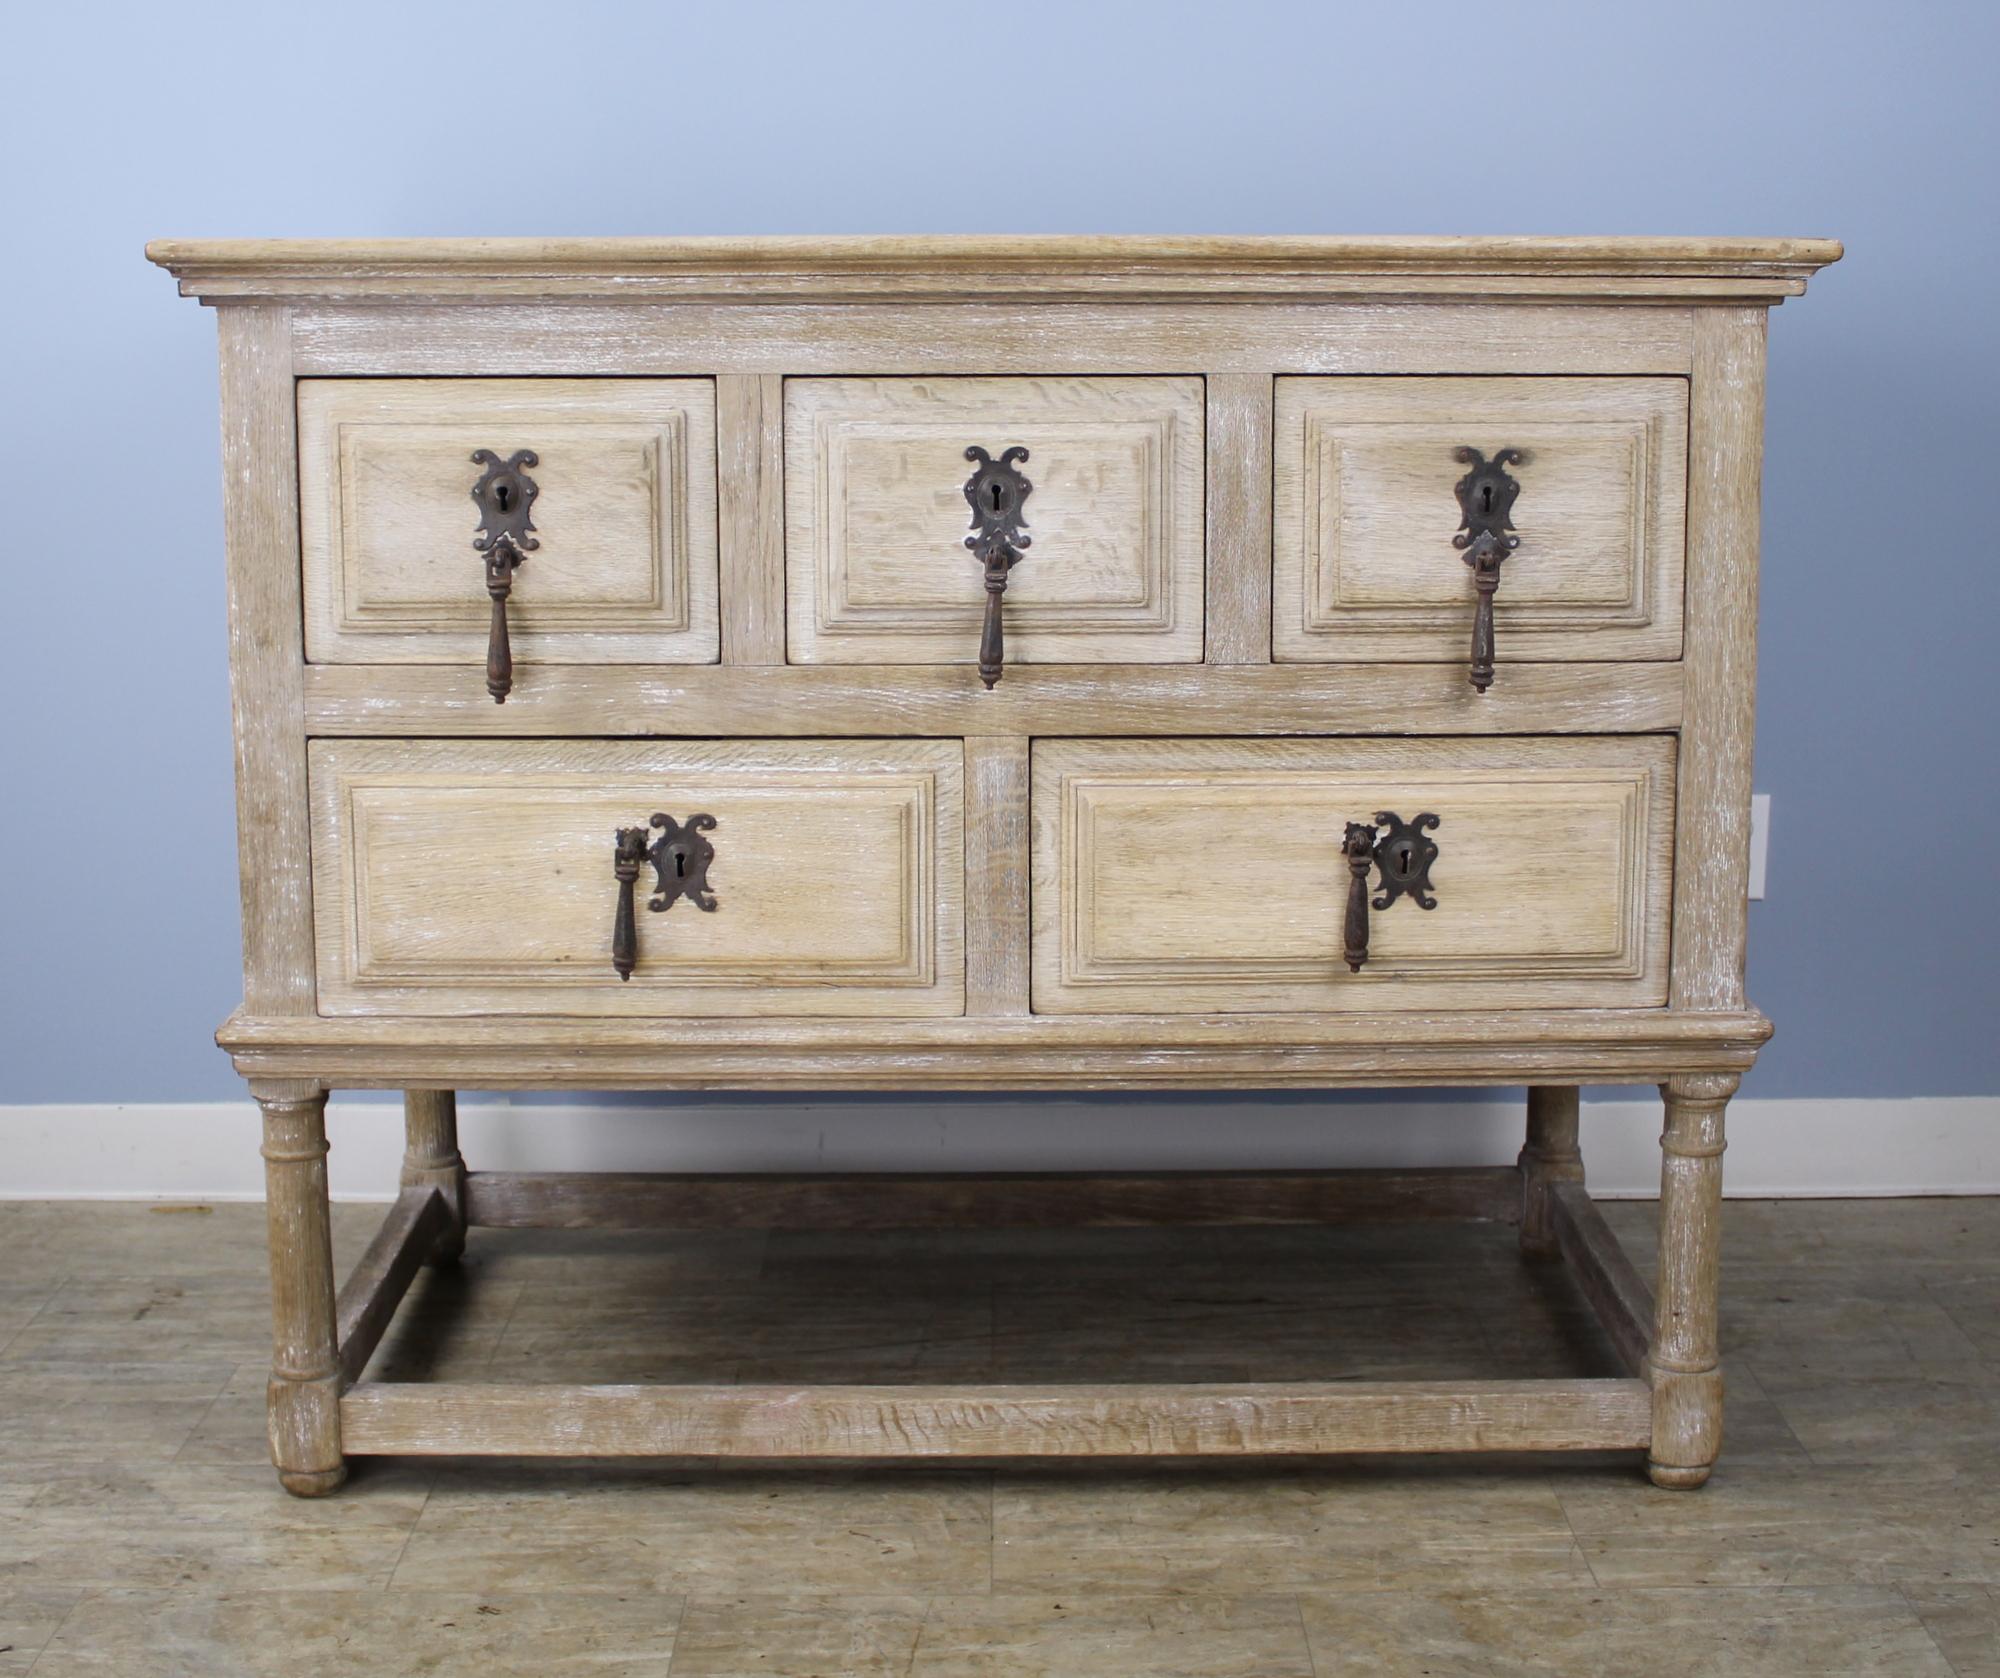 A handsome deep Italian commode or kitchen chest, with original paint that has been recently scrubbed back for a faded, modern look. Five deep drawers slide easily. The piece is the right height for common room storage and additionally as a work